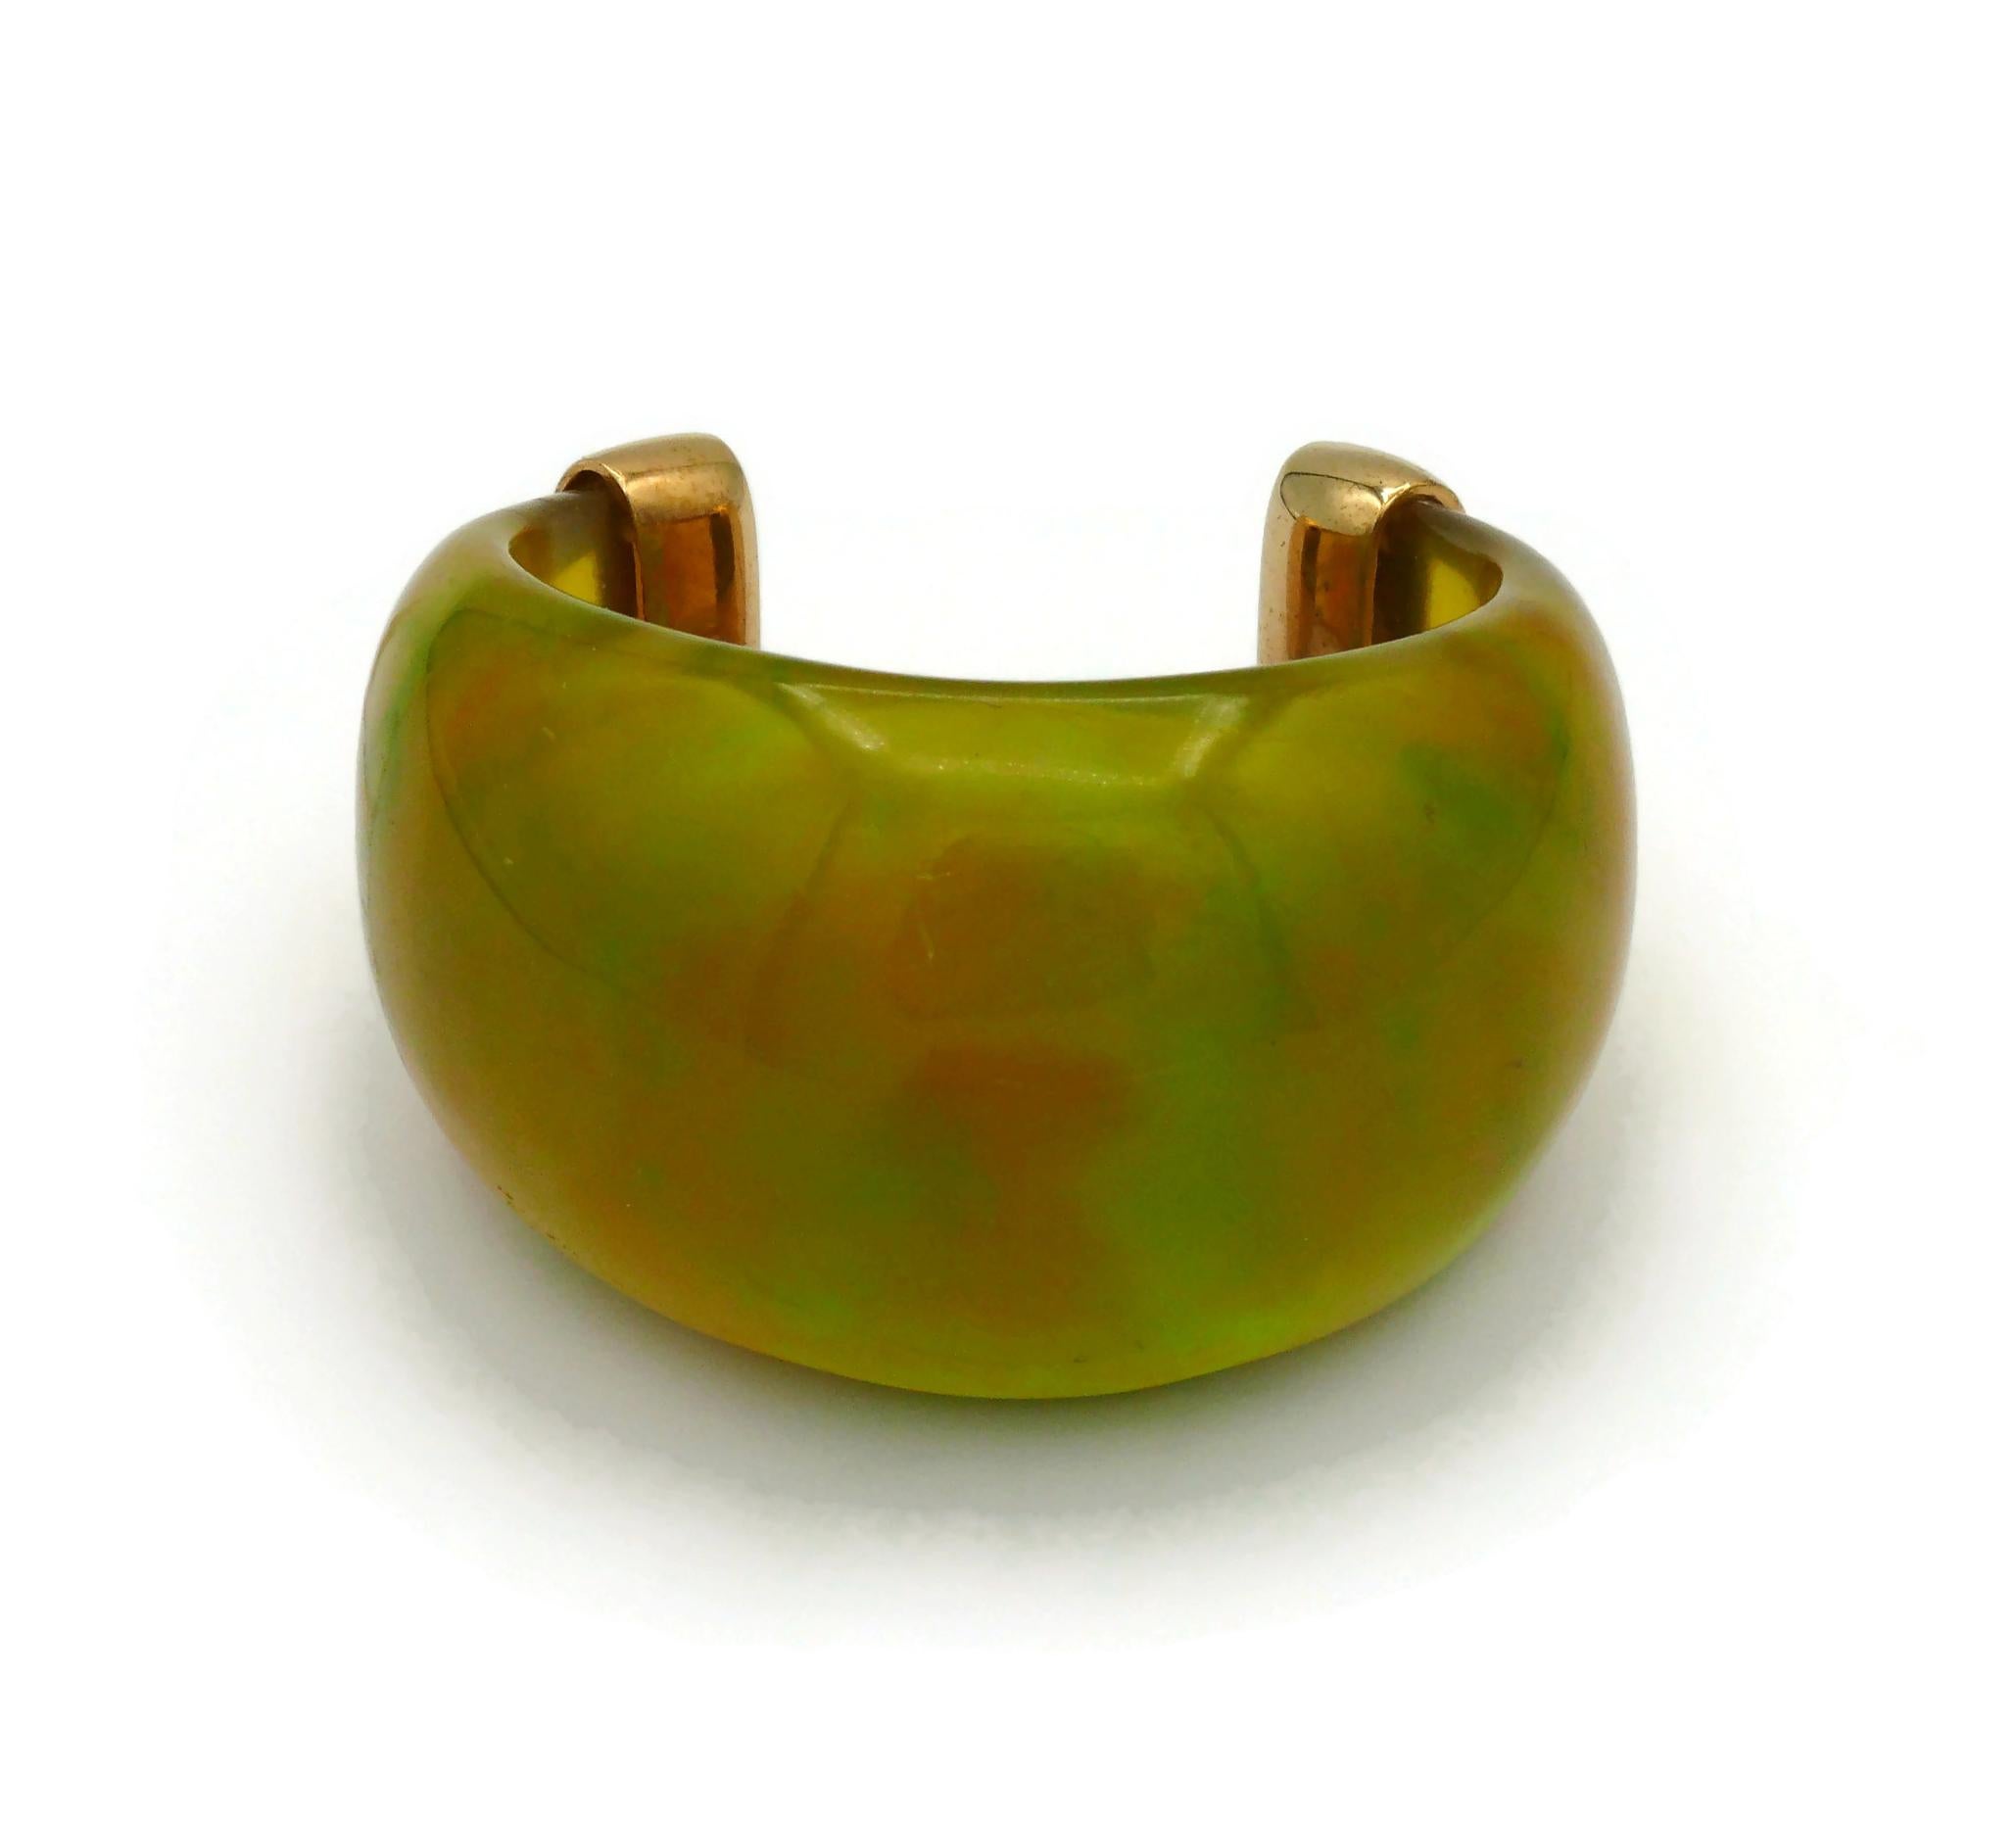 YVES SAINT LAURENT YSL Vintage Yellow Green Marbled Resin Cuff Bracelet For Sale 5